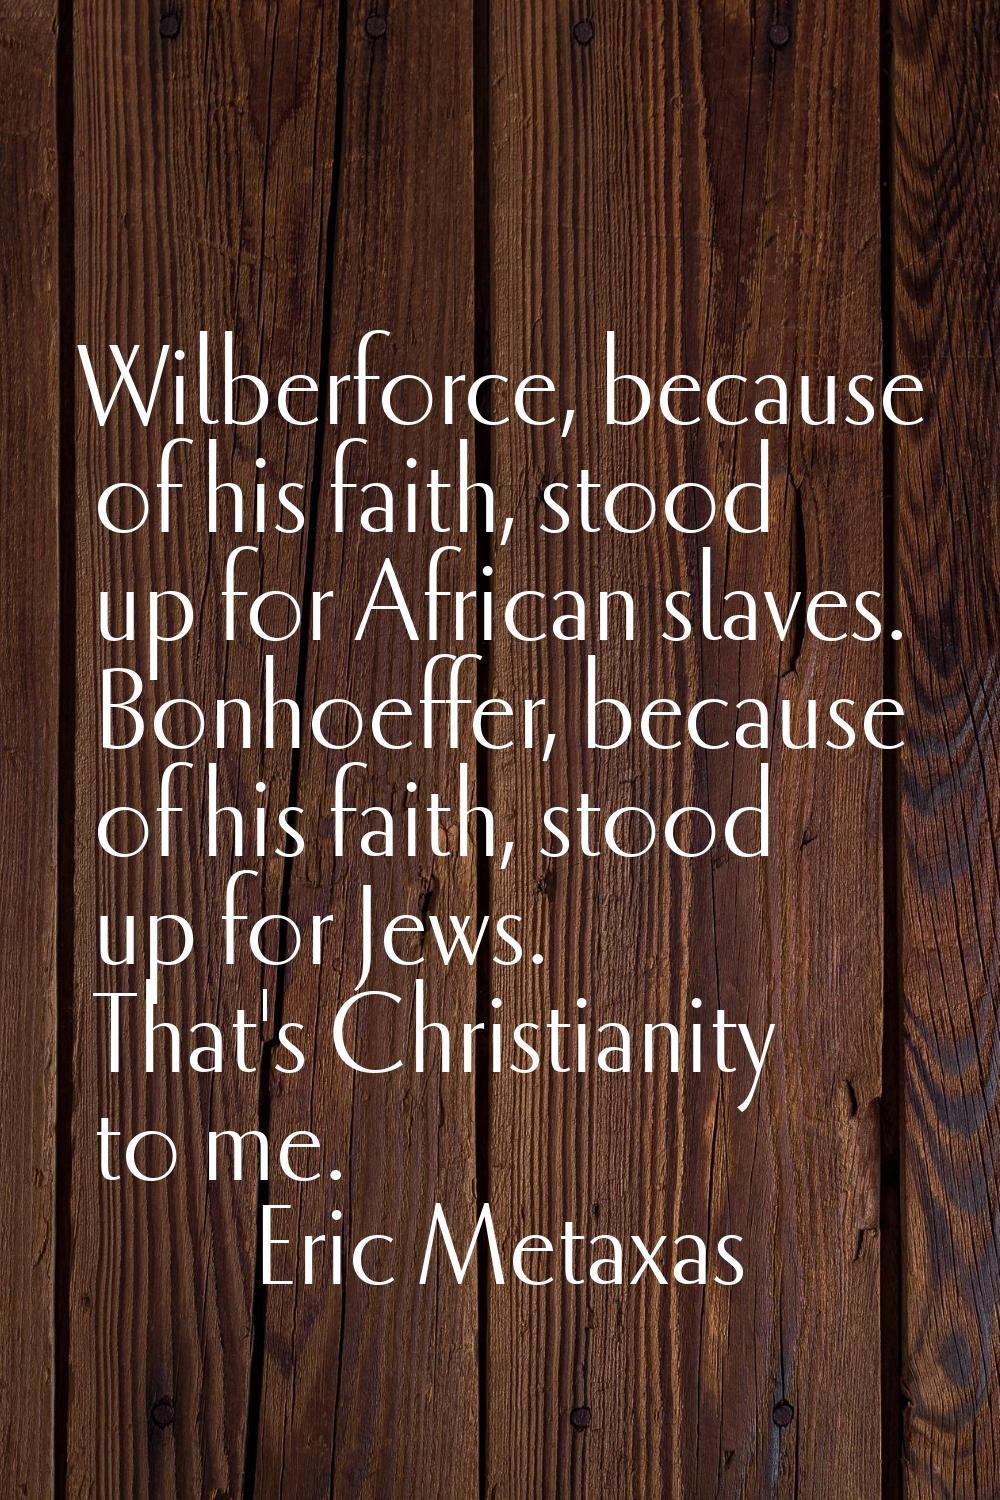 Wilberforce, because of his faith, stood up for African slaves. Bonhoeffer, because of his faith, s